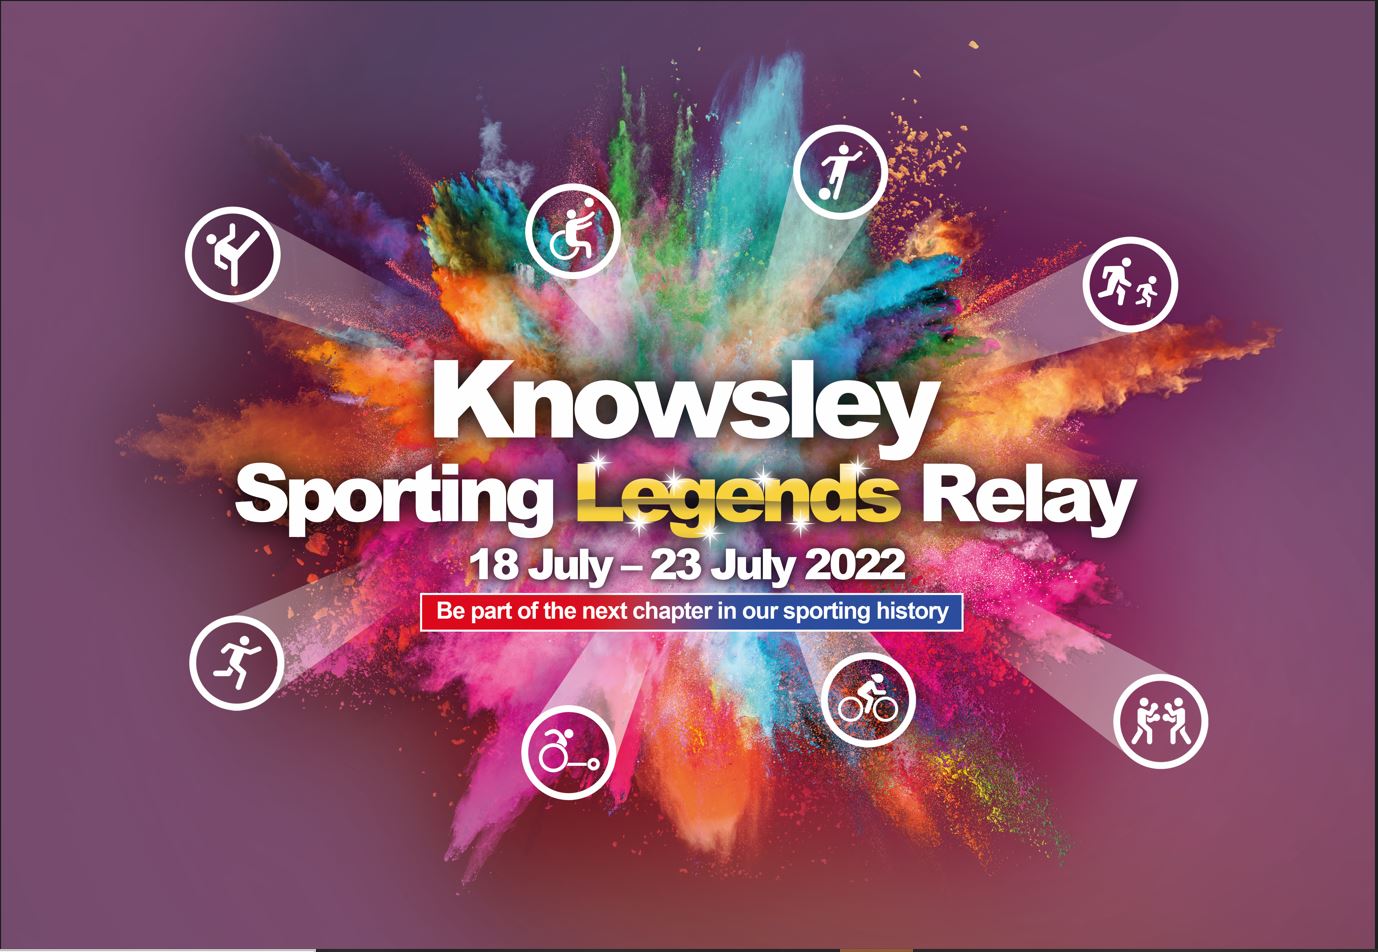 Knowsley Sporting Legends Relay